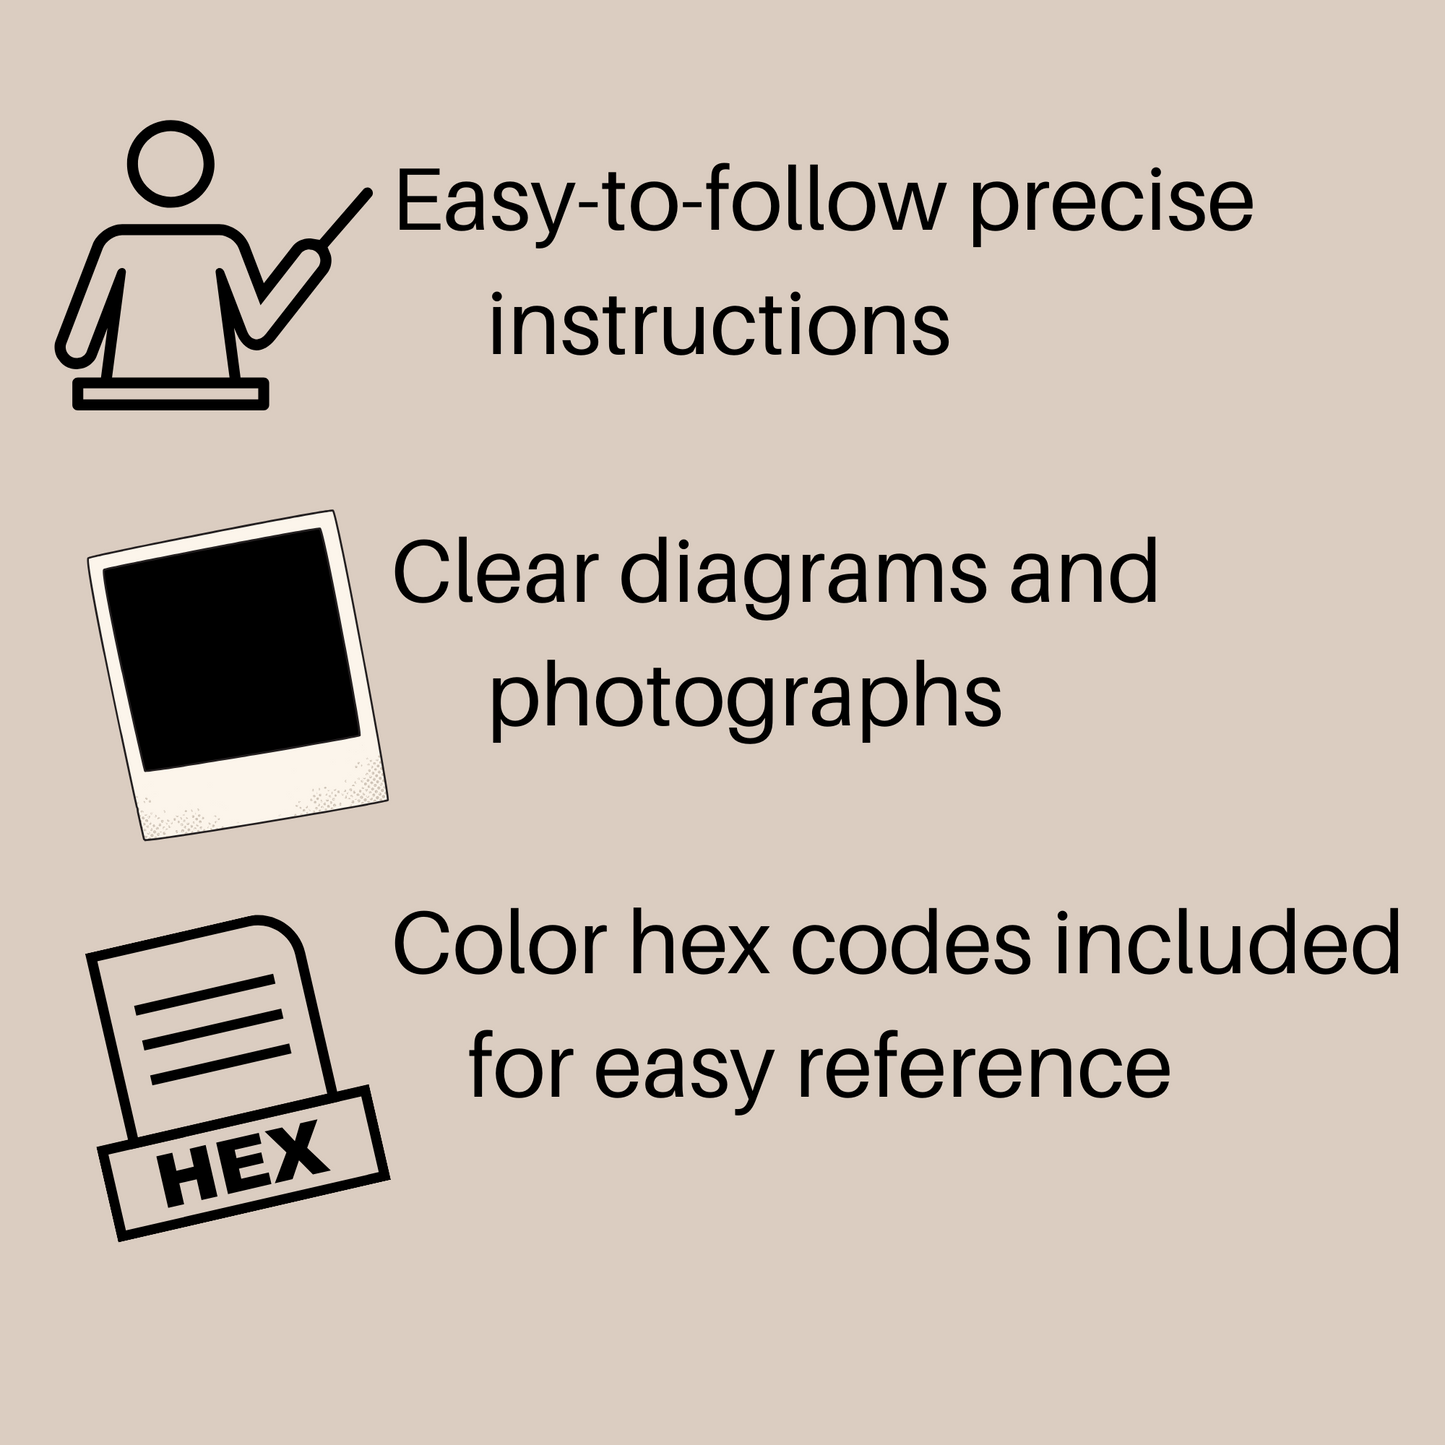 Polymer Clay Color Mixing tutorials benefits: Easy-to-follow instructions, clear diagrams, color hex codes included